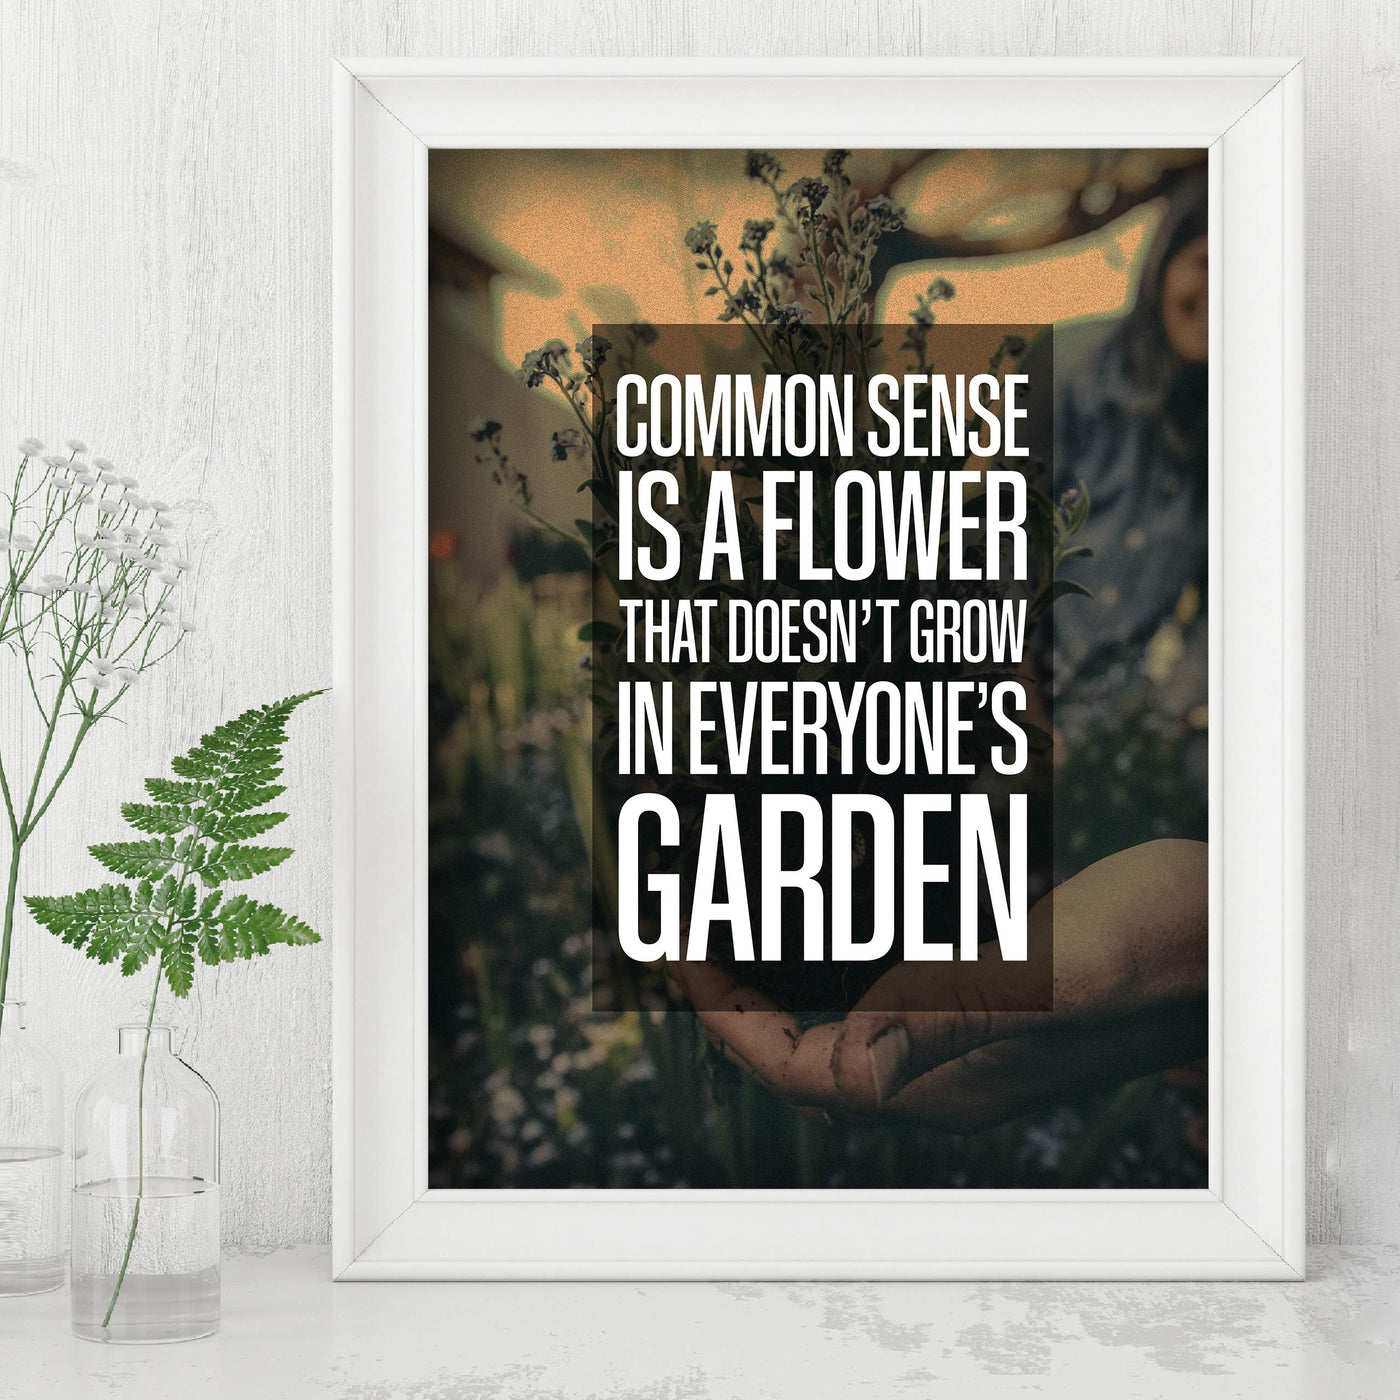 Common Sense-Flower That Doesn't Grow In Everyone's Garden Funny Wall Art -8 x 10" Sarcastic Floral Print-Ready to Frame. Humorous Home-Office-Bar-Shop-Cave Decor. Great Novelty Sign & Fun Gift!